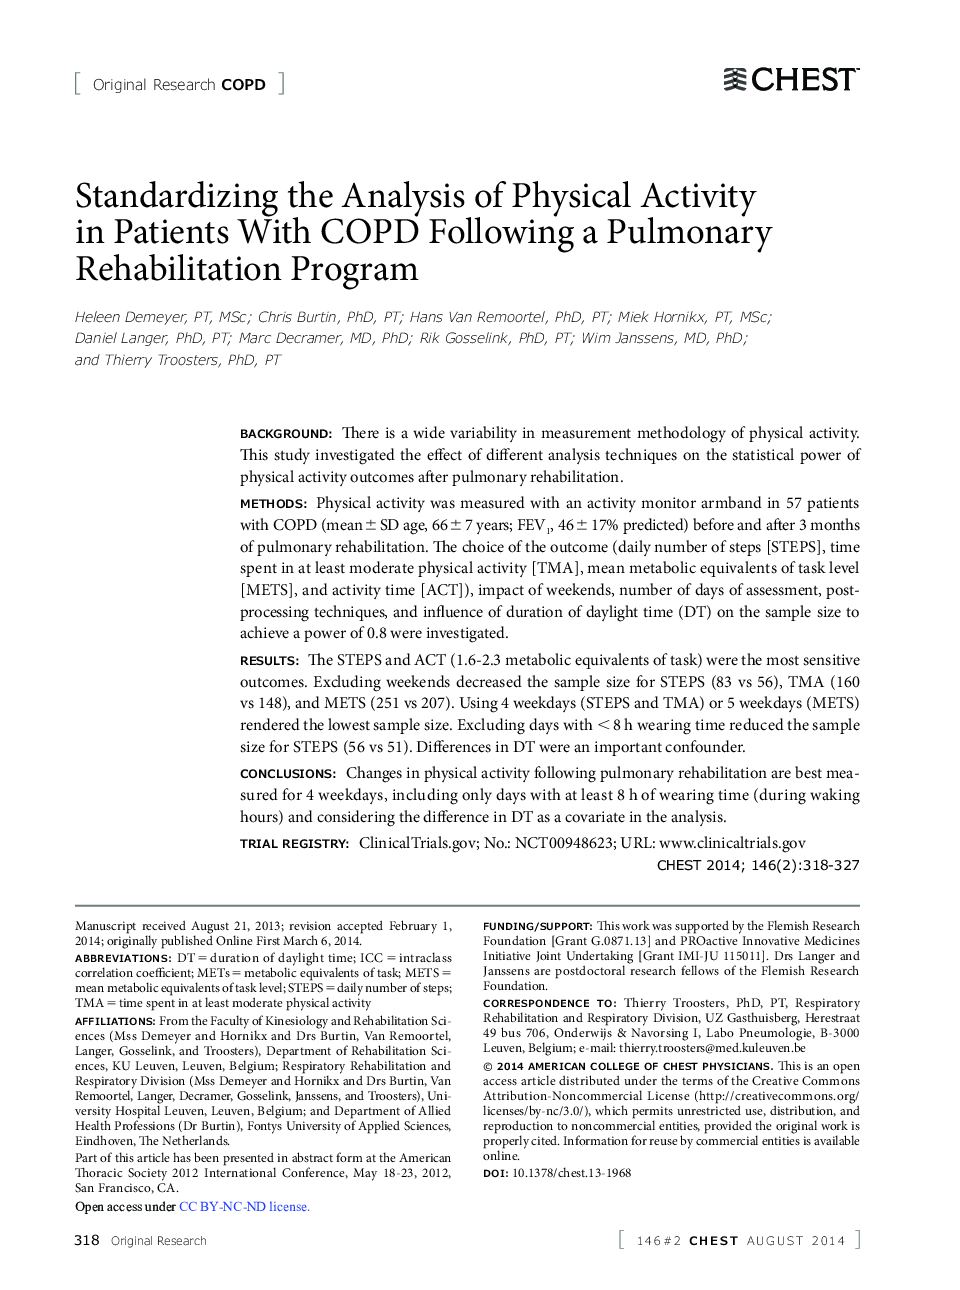 Standardizing the Analysis of Physical Activity in Patients With COPD Following a Pulmonary Rehabilitation Program